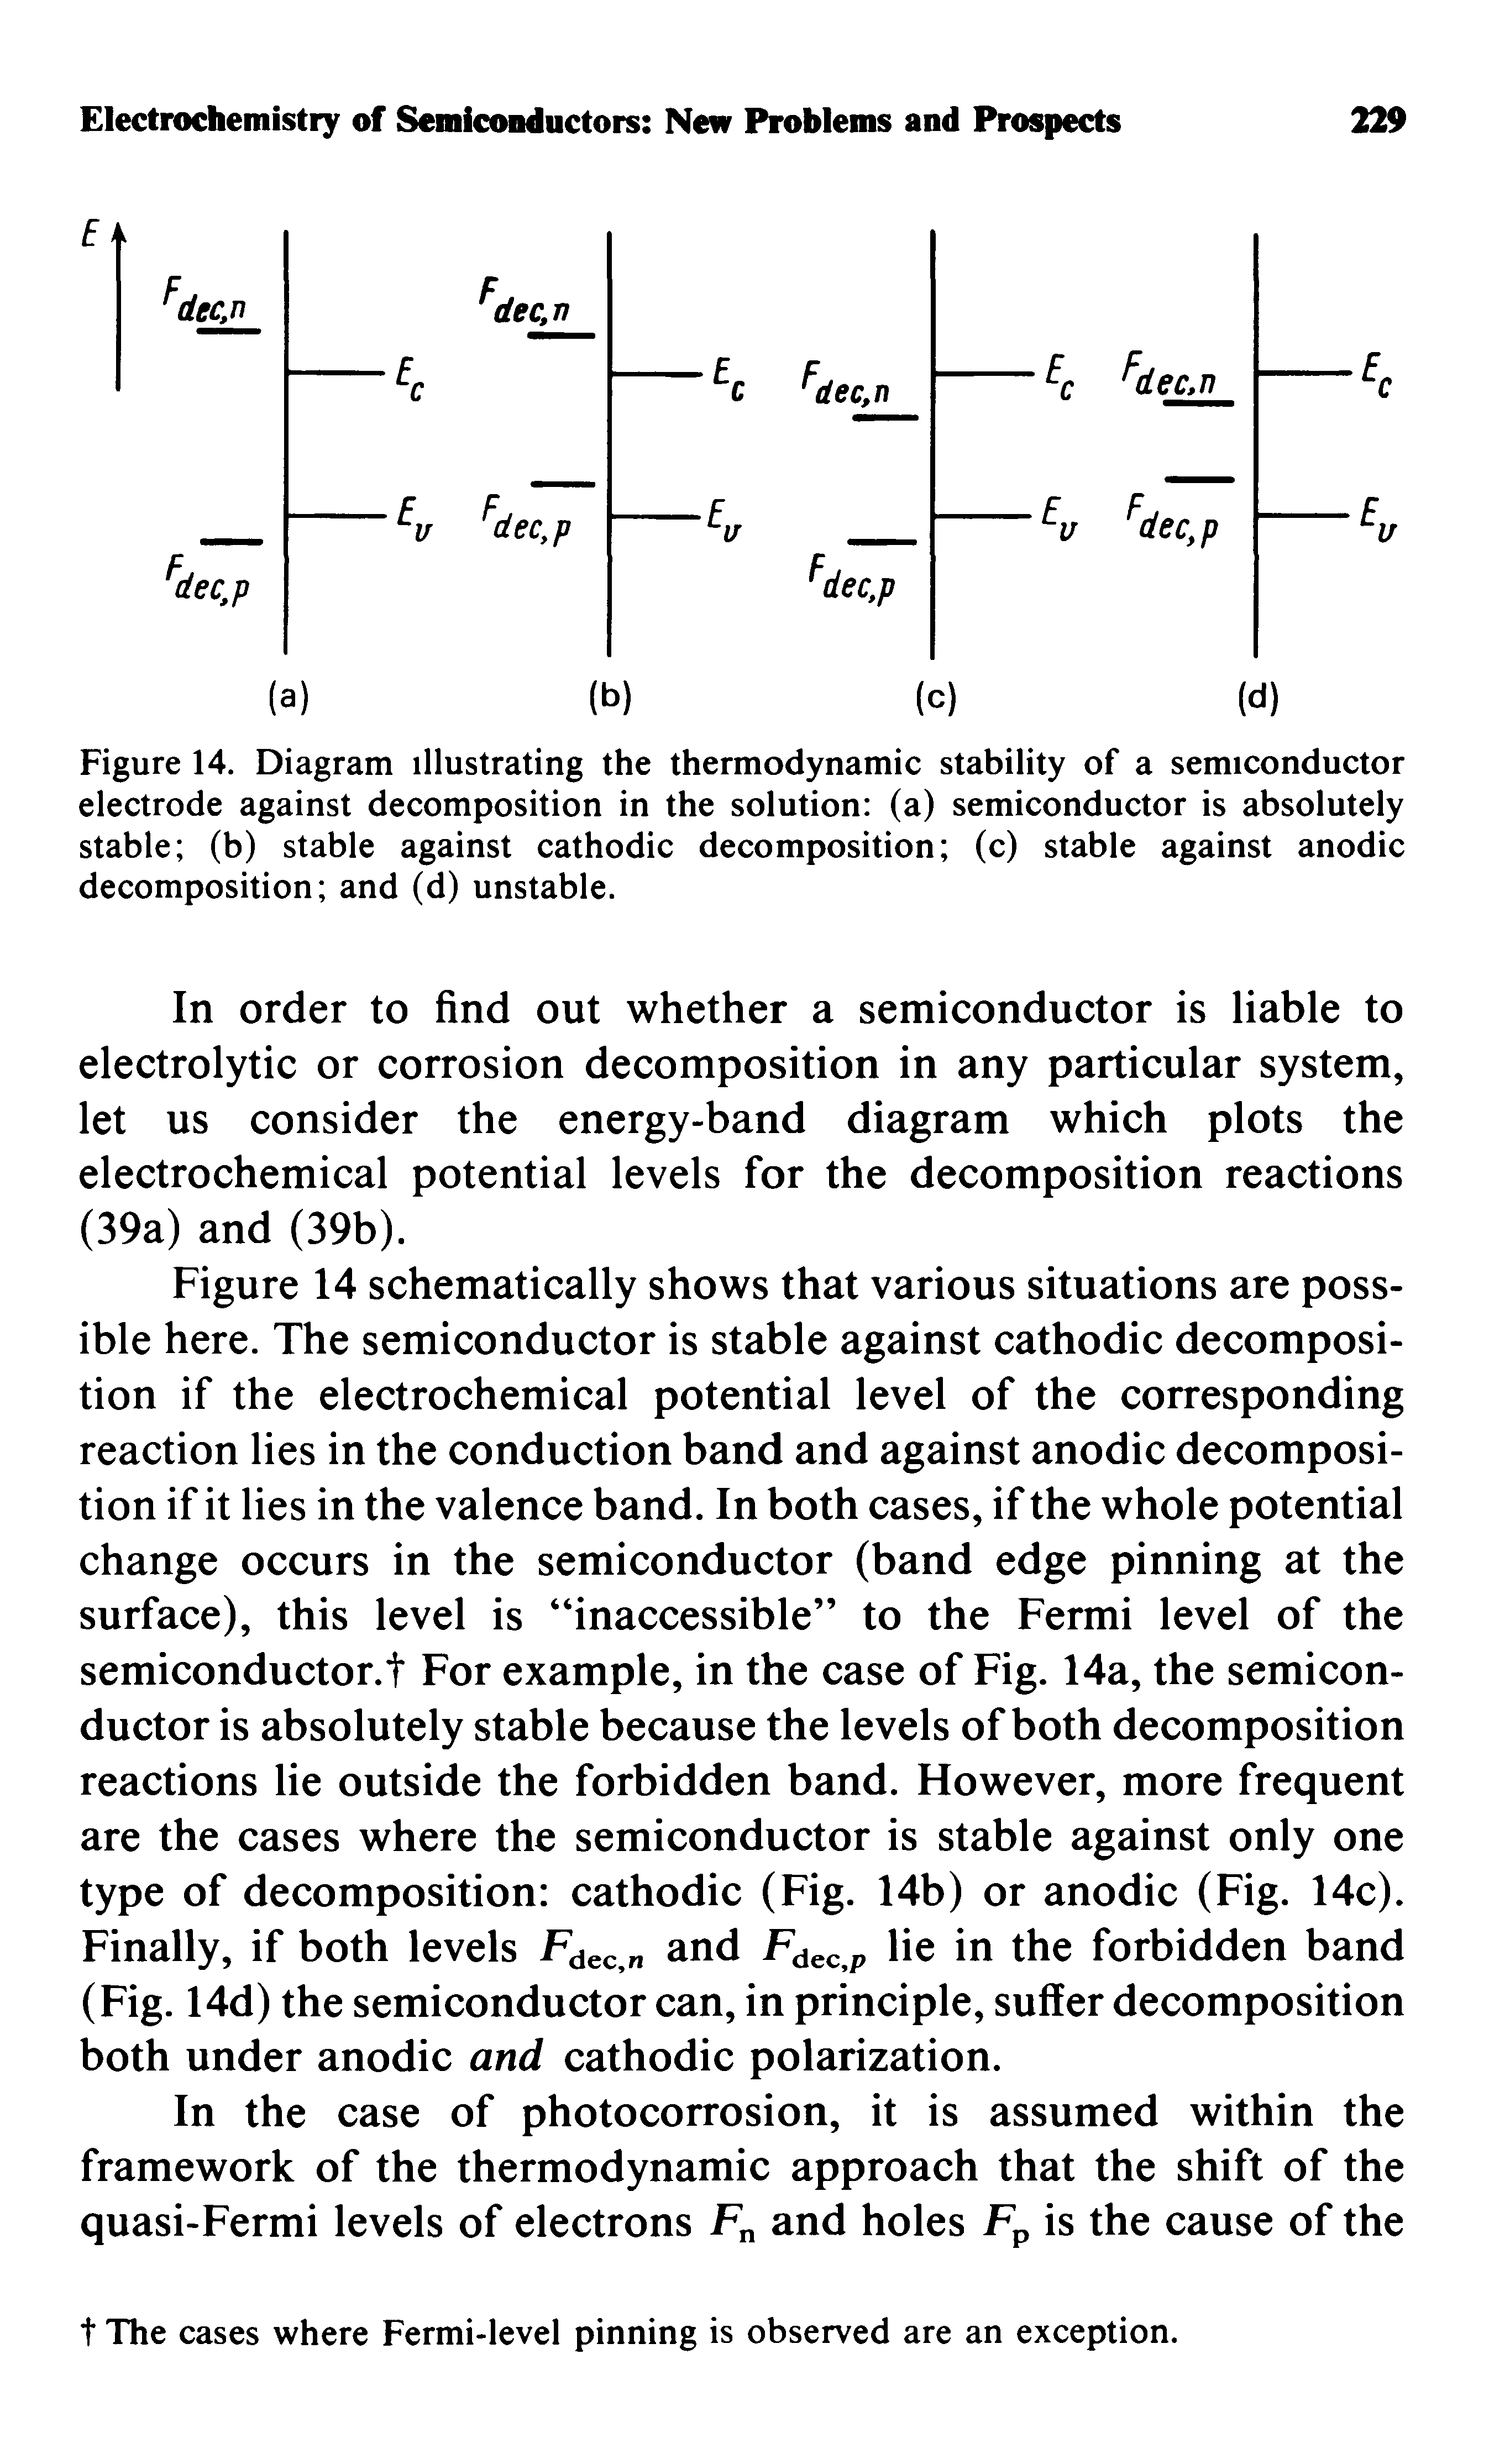 Figure 14. Diagram illustrating the thermodynamic stability of a semiconductor electrode against decomposition in the solution (a) semiconductor is absolutely stable (b) stable against cathodic decomposition (c) stable against anodic decomposition and (d) unstable.